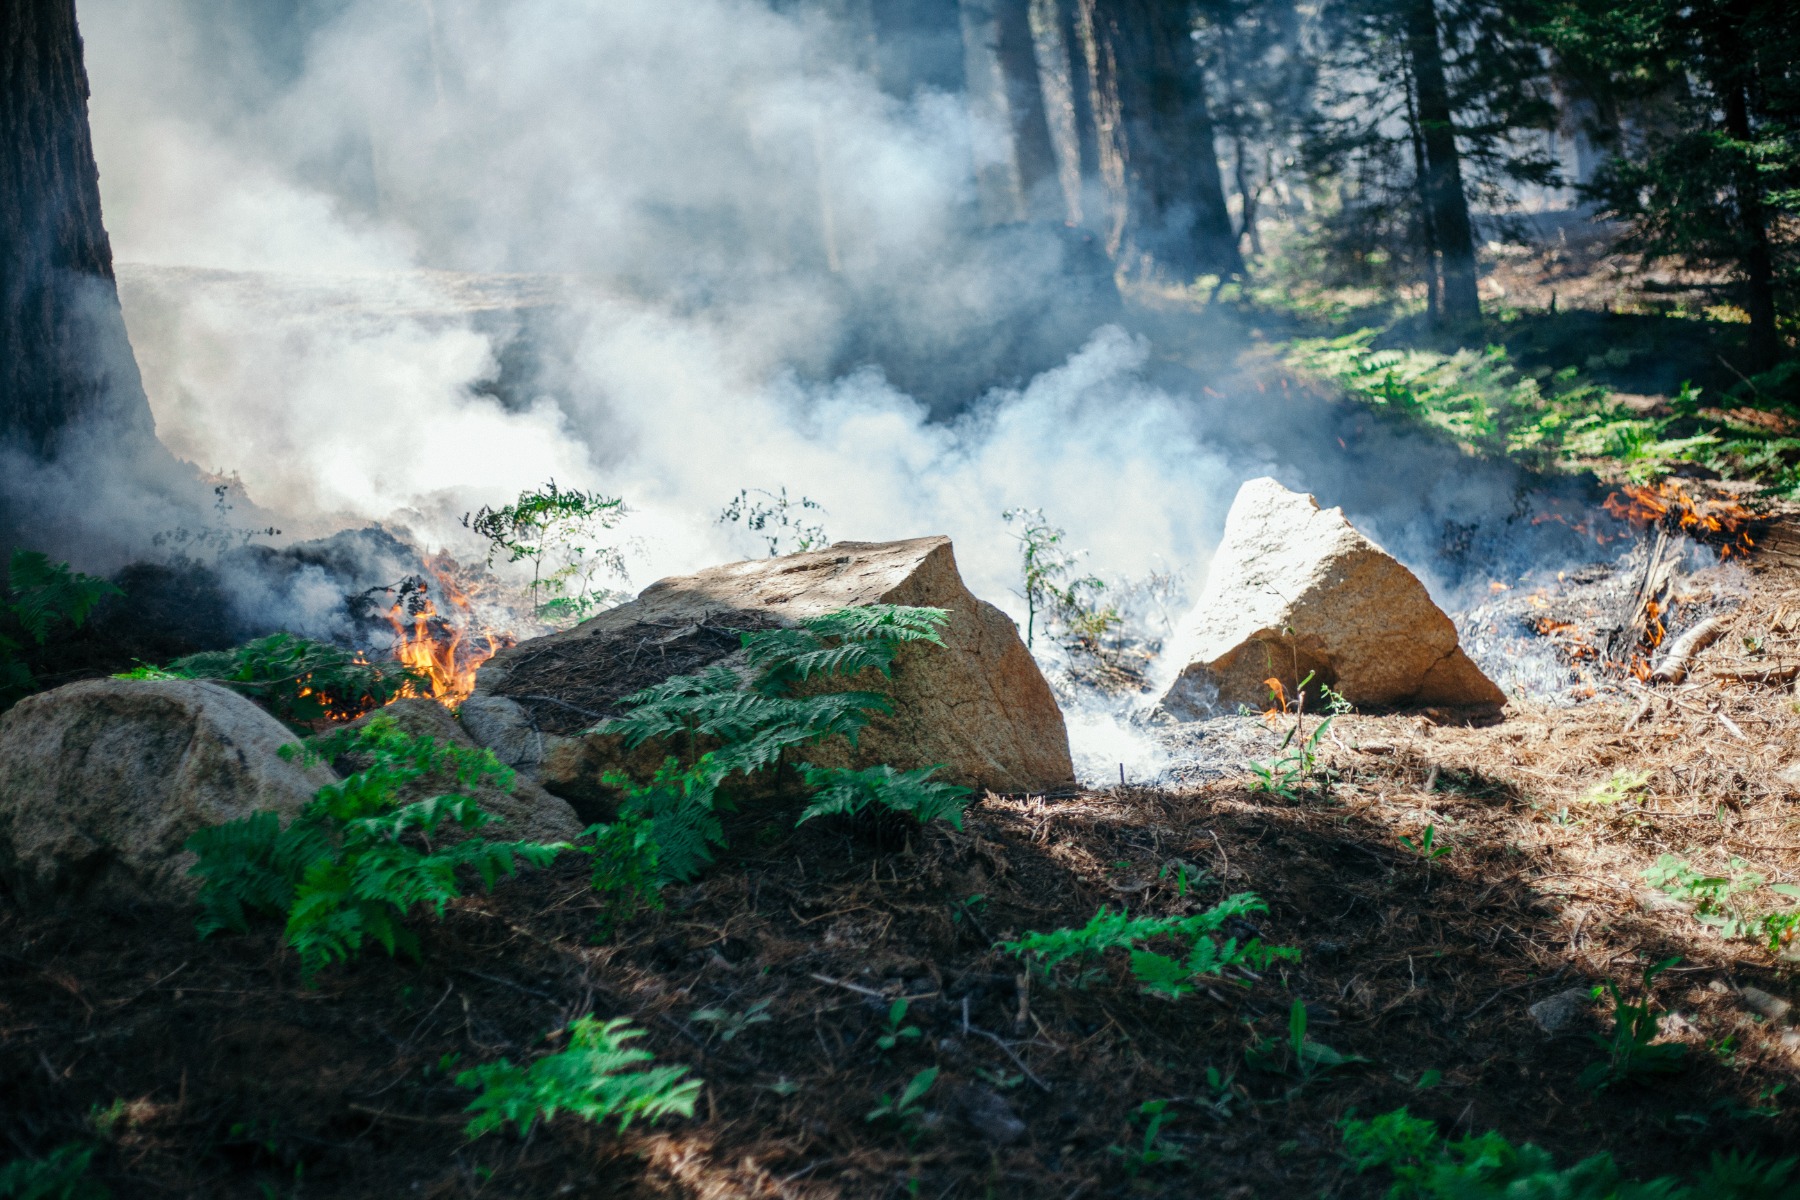 Smoke coming out of burning pieces of wood in a forest